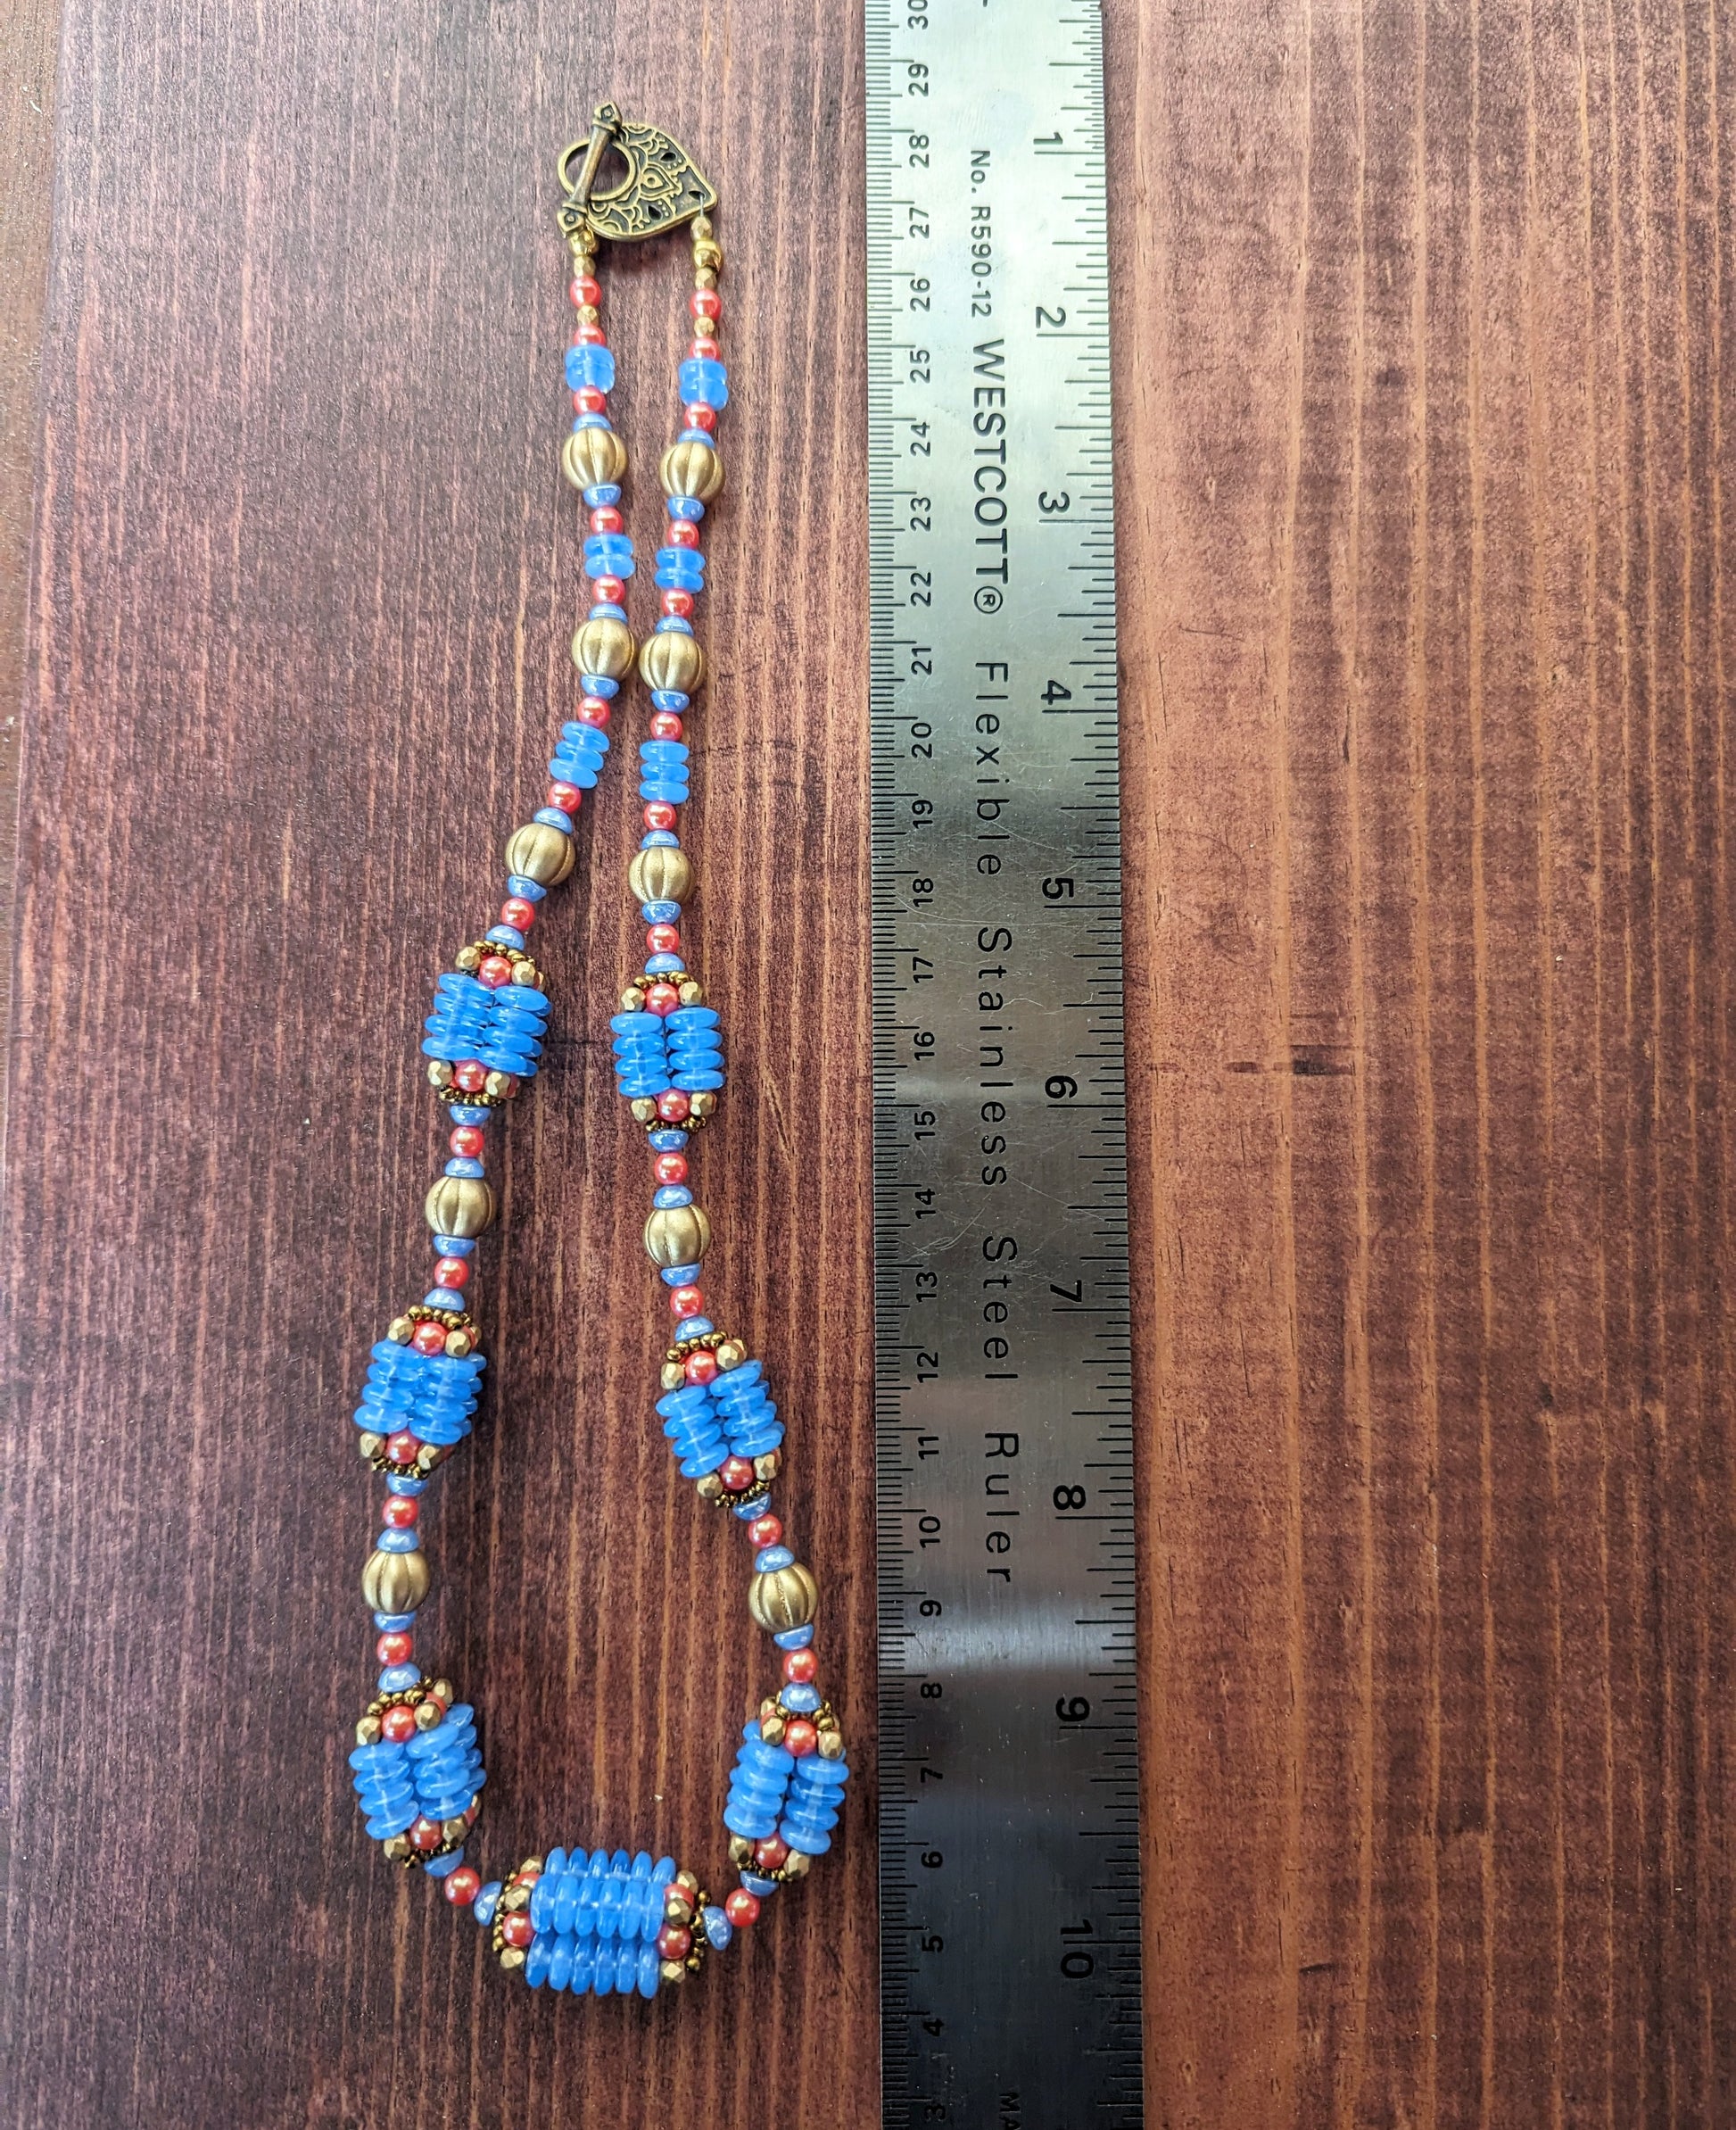 A necklace with bright opal blue, gold, and orangey red beads is laid out alongside a metal ruler on a reddish wood board. A teardrop shaped brass toggle clasp is visible. The necklace has nine beaded beads that are comprised of four columns of blue discs and capped with gold and red beads